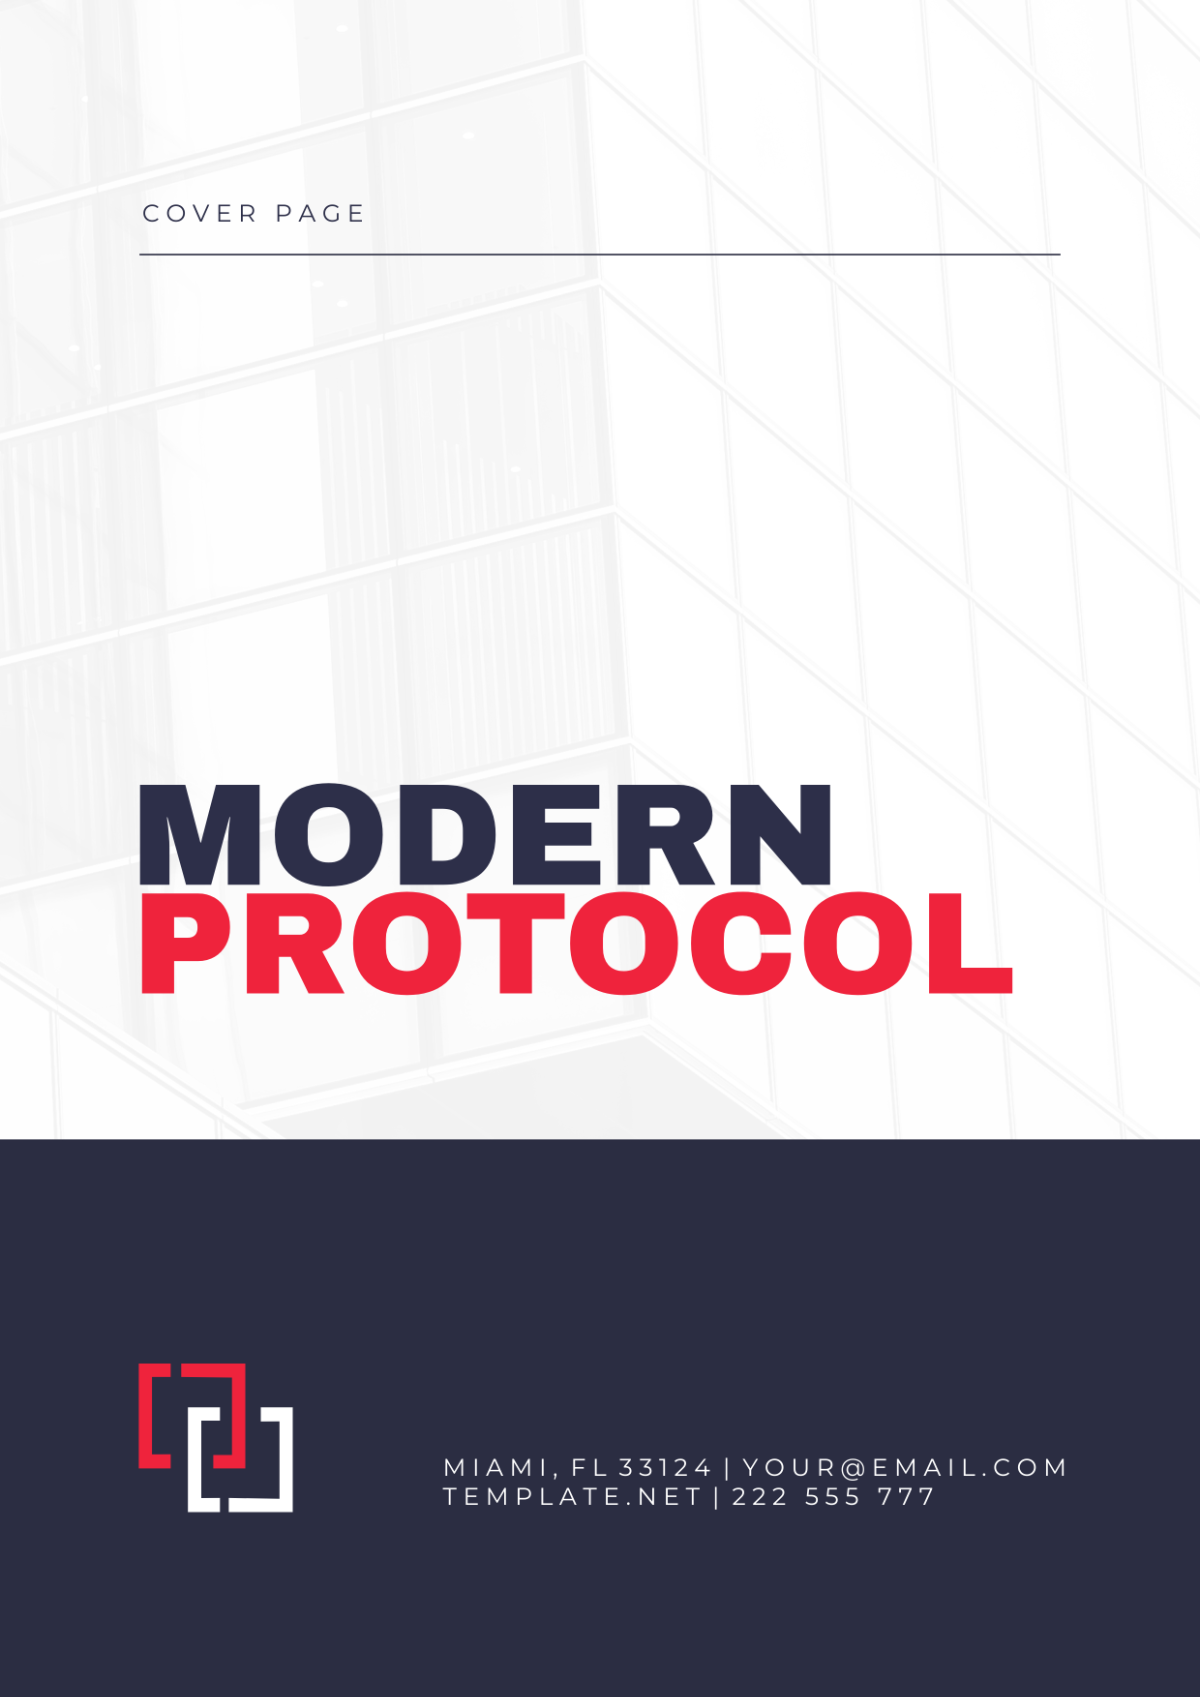 Modern Protocol Cover Page